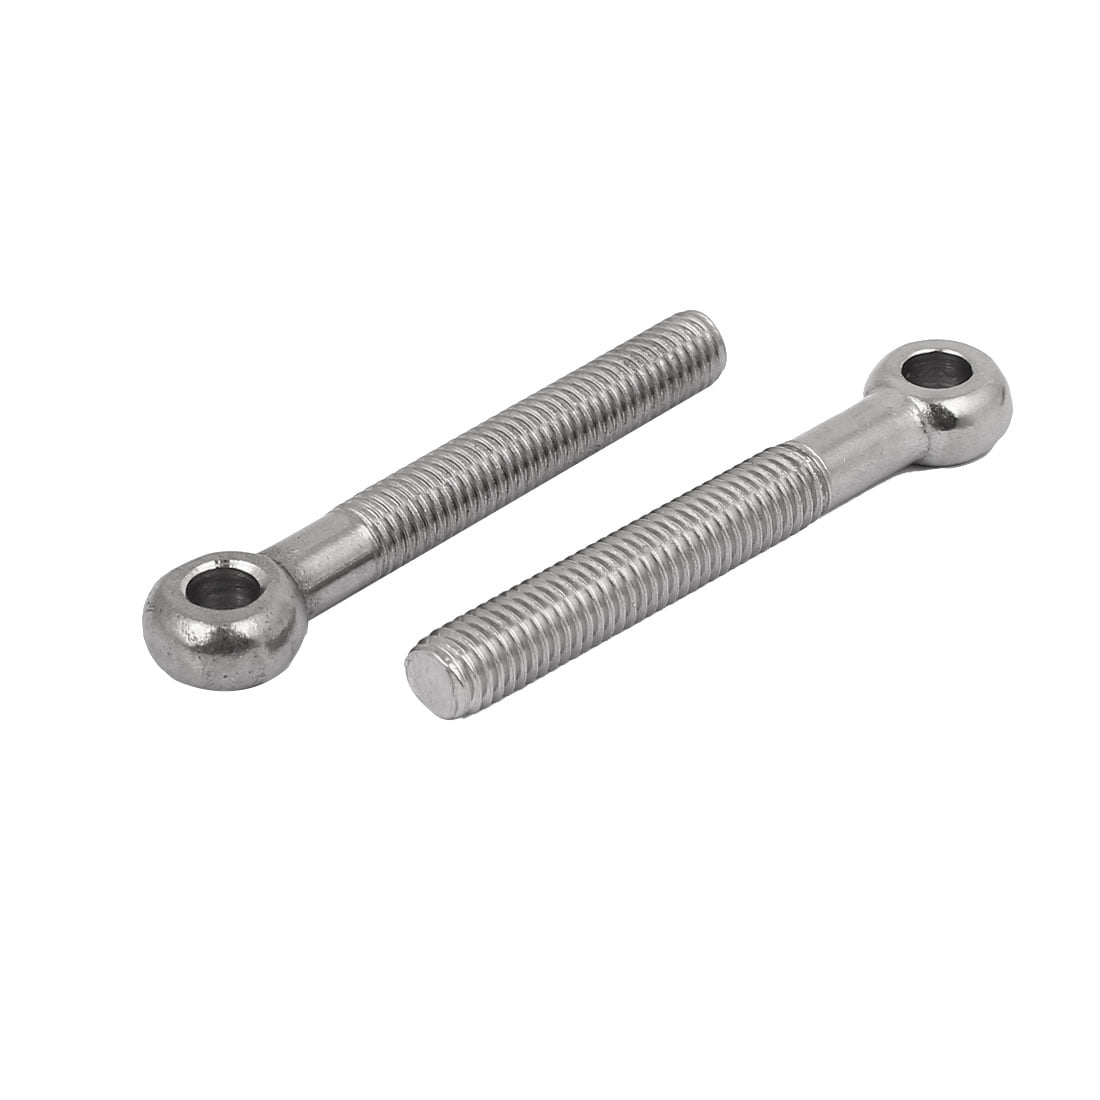 M8 304 Stainless Steel Machinery Shoulder Lifting Eye Bolts Ring Link Axle Screw 